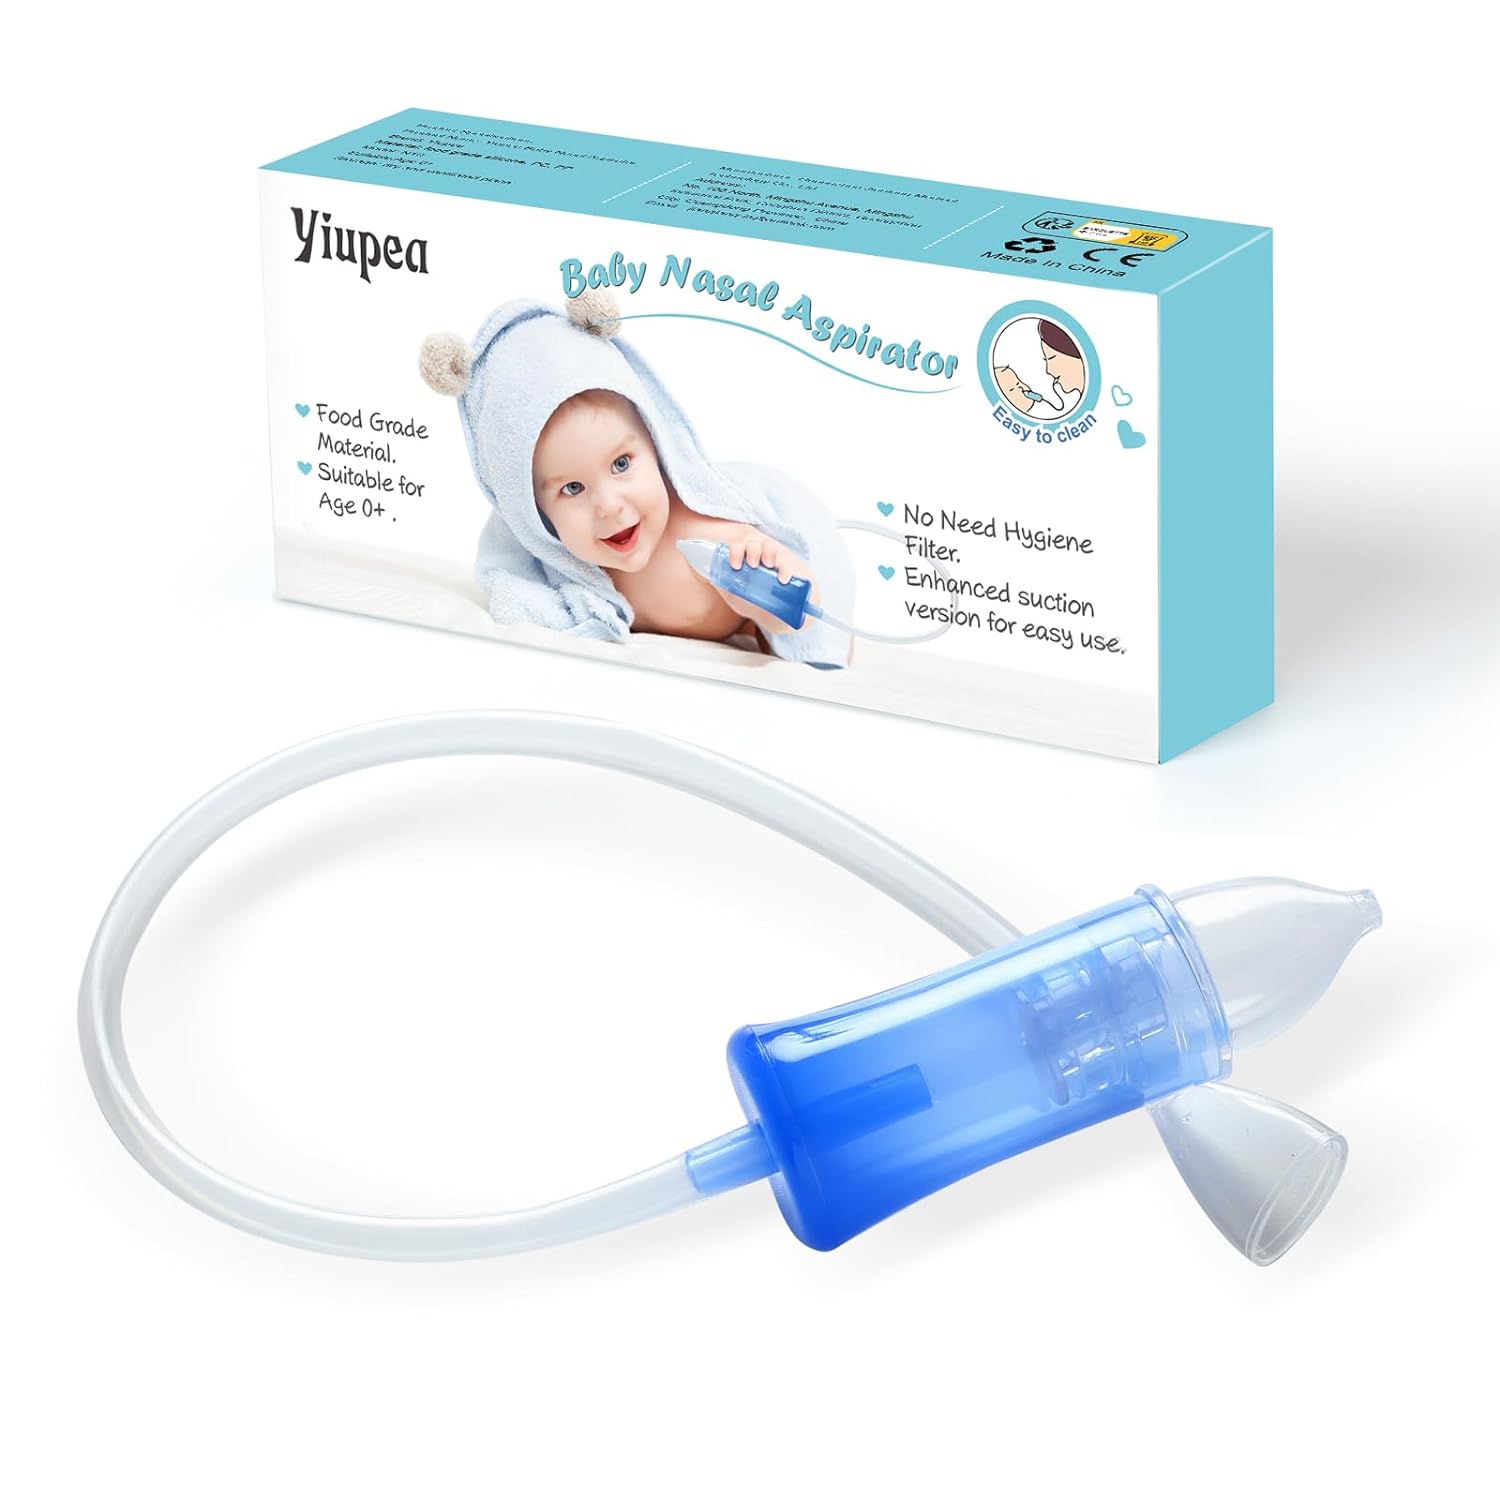 Baby Nasal Aspirator & No Need Hygiene Filter, Baby Shower Gift,Reusable Nose Cleaner with Storage Case and Cleaning Brush, Soft Silicone Tips& Increased Suction Version, Easy to Use and Clean